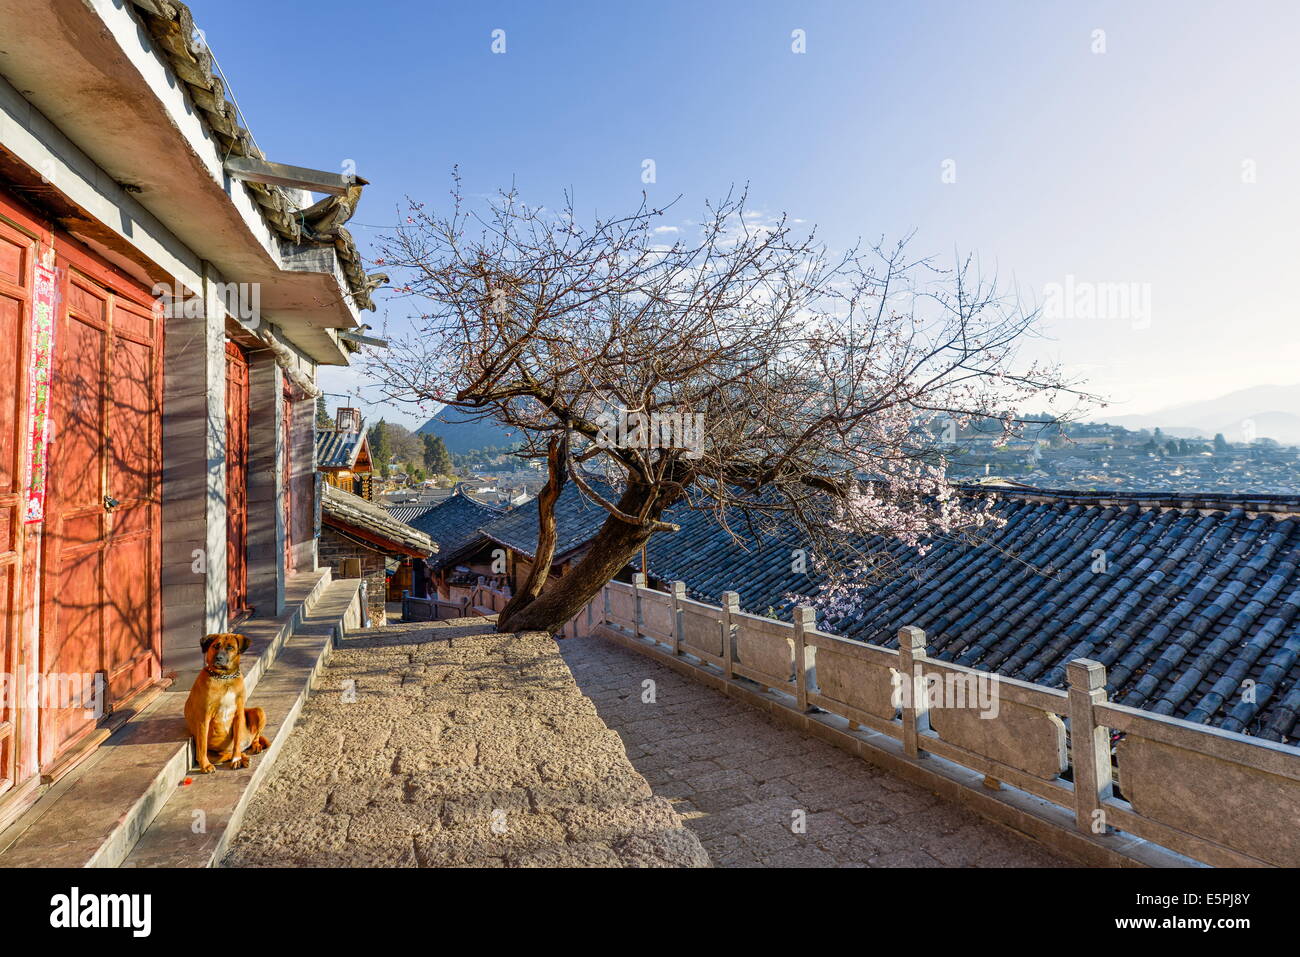 Dog sitting in the sun, with plum tree and Lijiang roofs, Lijiang, Yunnan, China, Asia Stock Photo